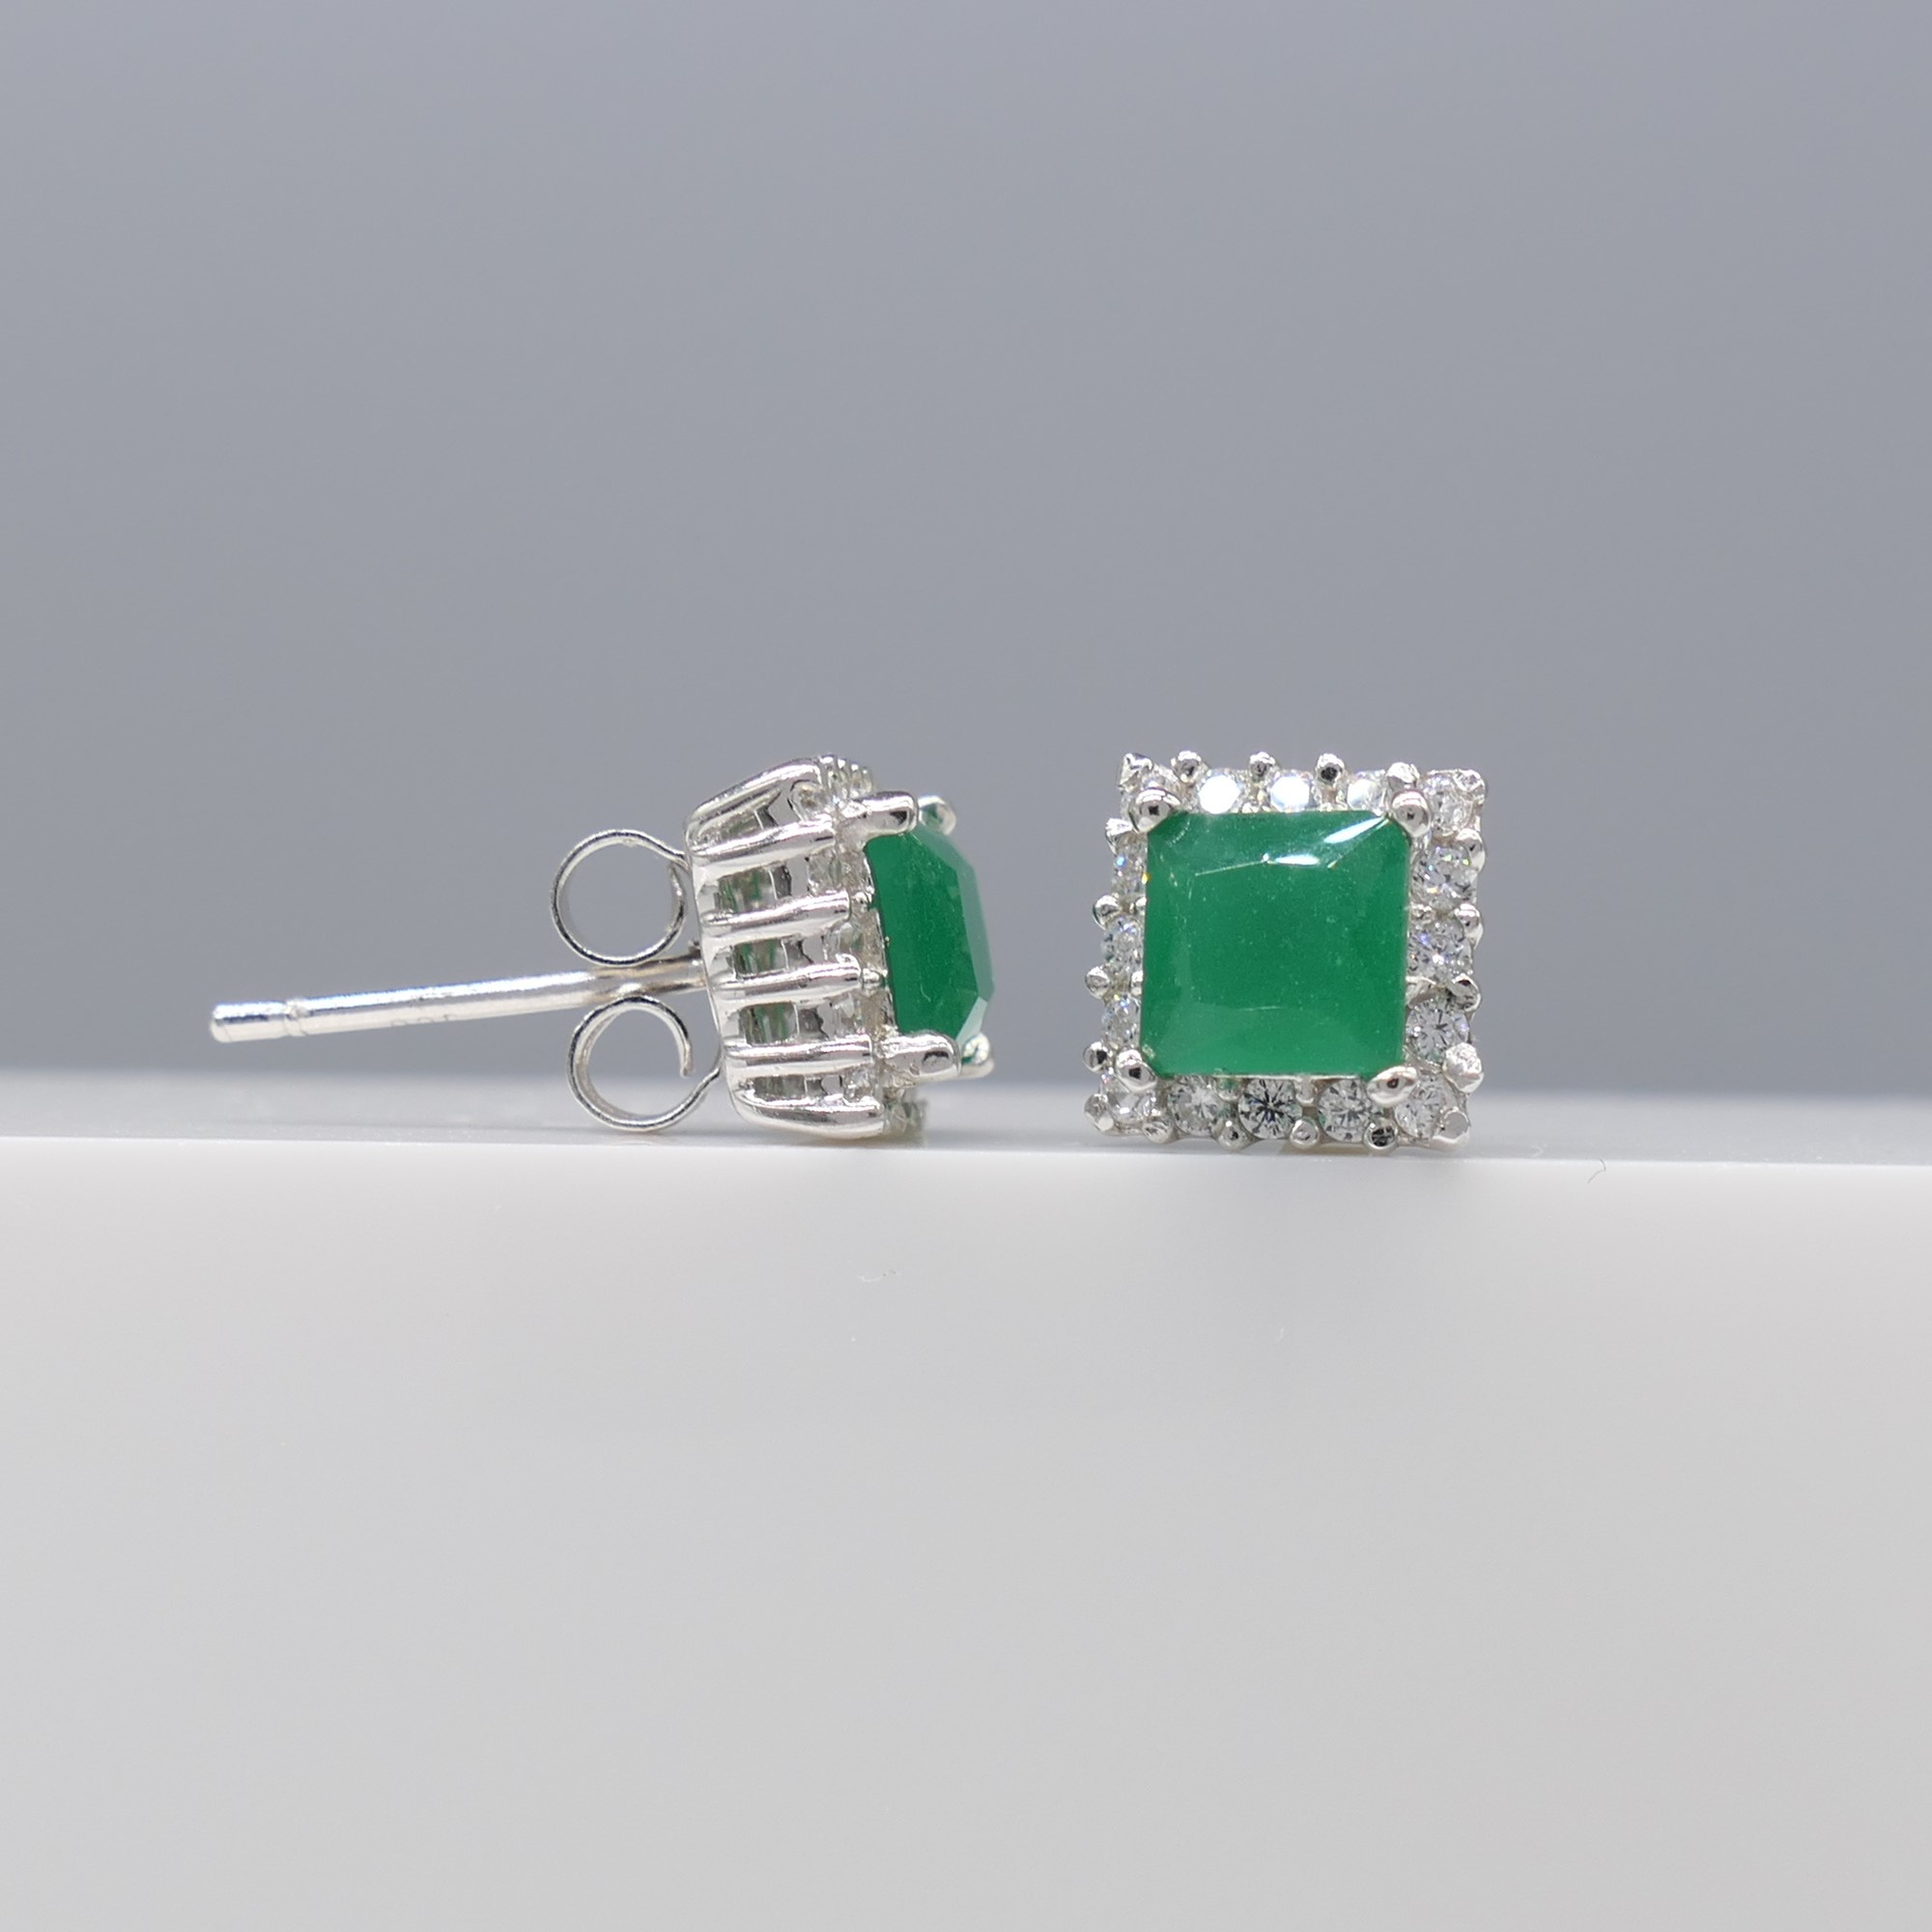 Pair of Silver Square-Set Green and White Cubic Zirconia Ear Studs - Image 5 of 6